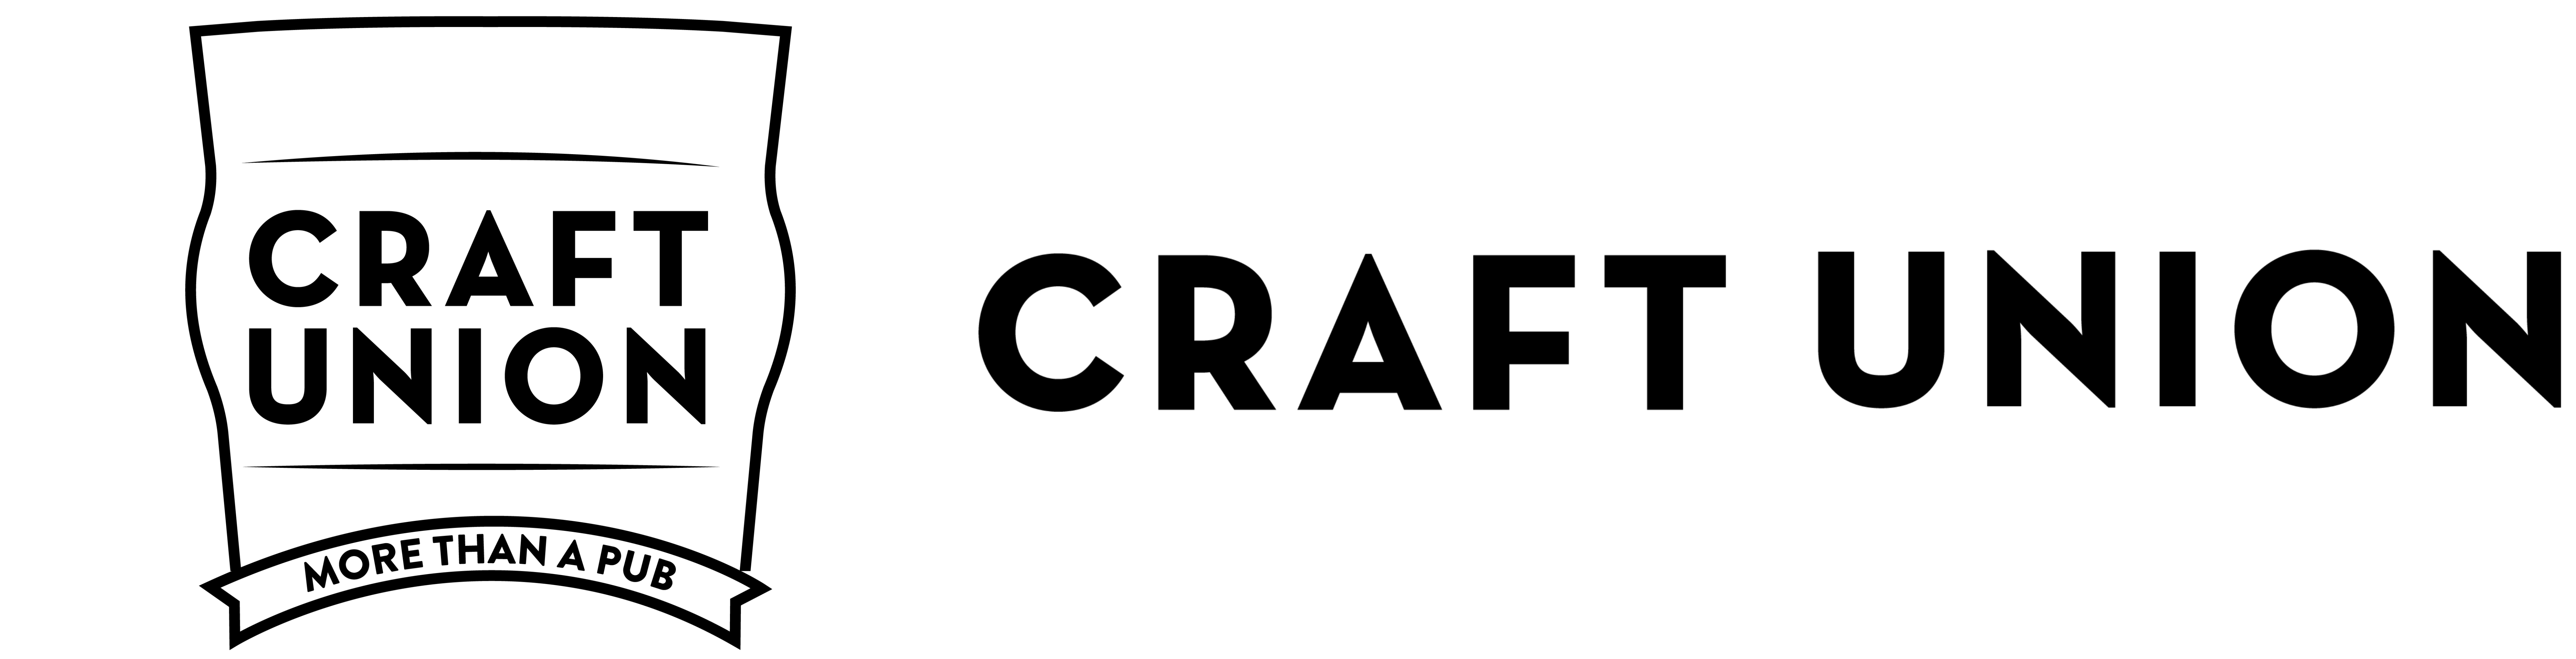 Craft Union Careers Stonegate Group